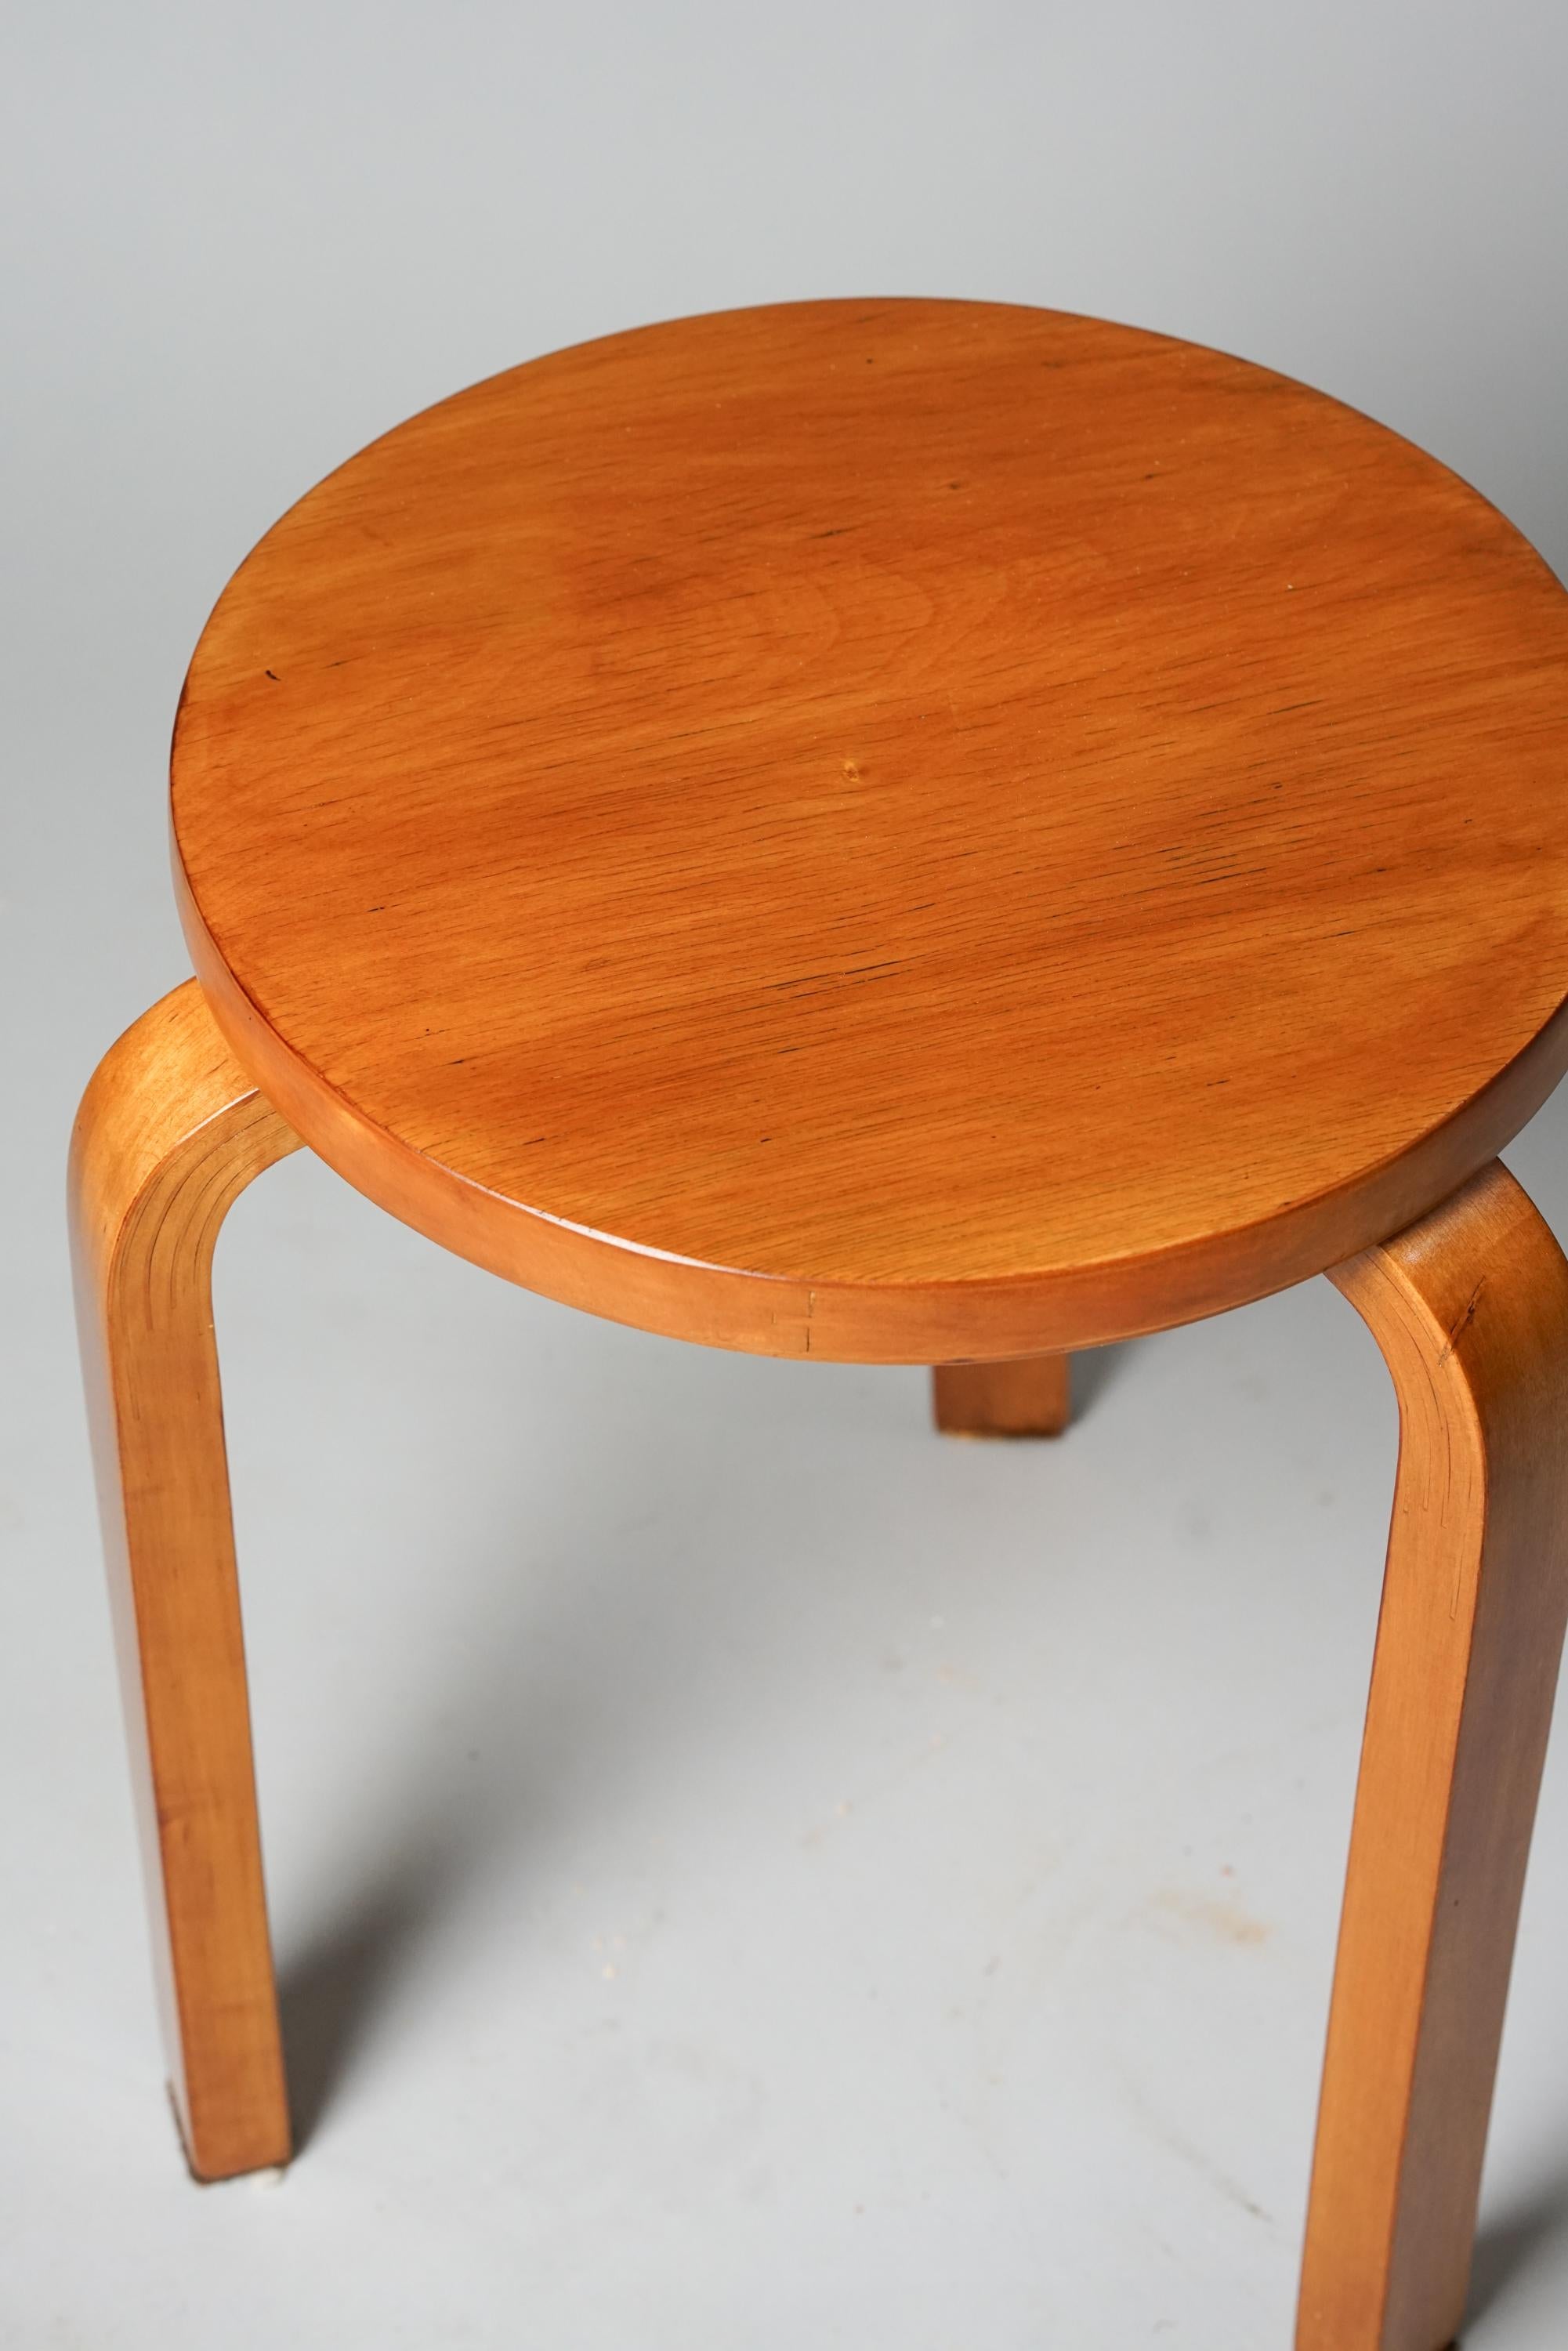 Model 60 Stool, designed by Alvar Aalto, manufactured by Oy Huonekalu- ja Rakennustyötehdas Ab, 1930/1940s. Birch. Good vintage condition, gorgeous patina. 

Alvar Aalto (1898-1976) is probably the most famous Finnish architect and designer in the